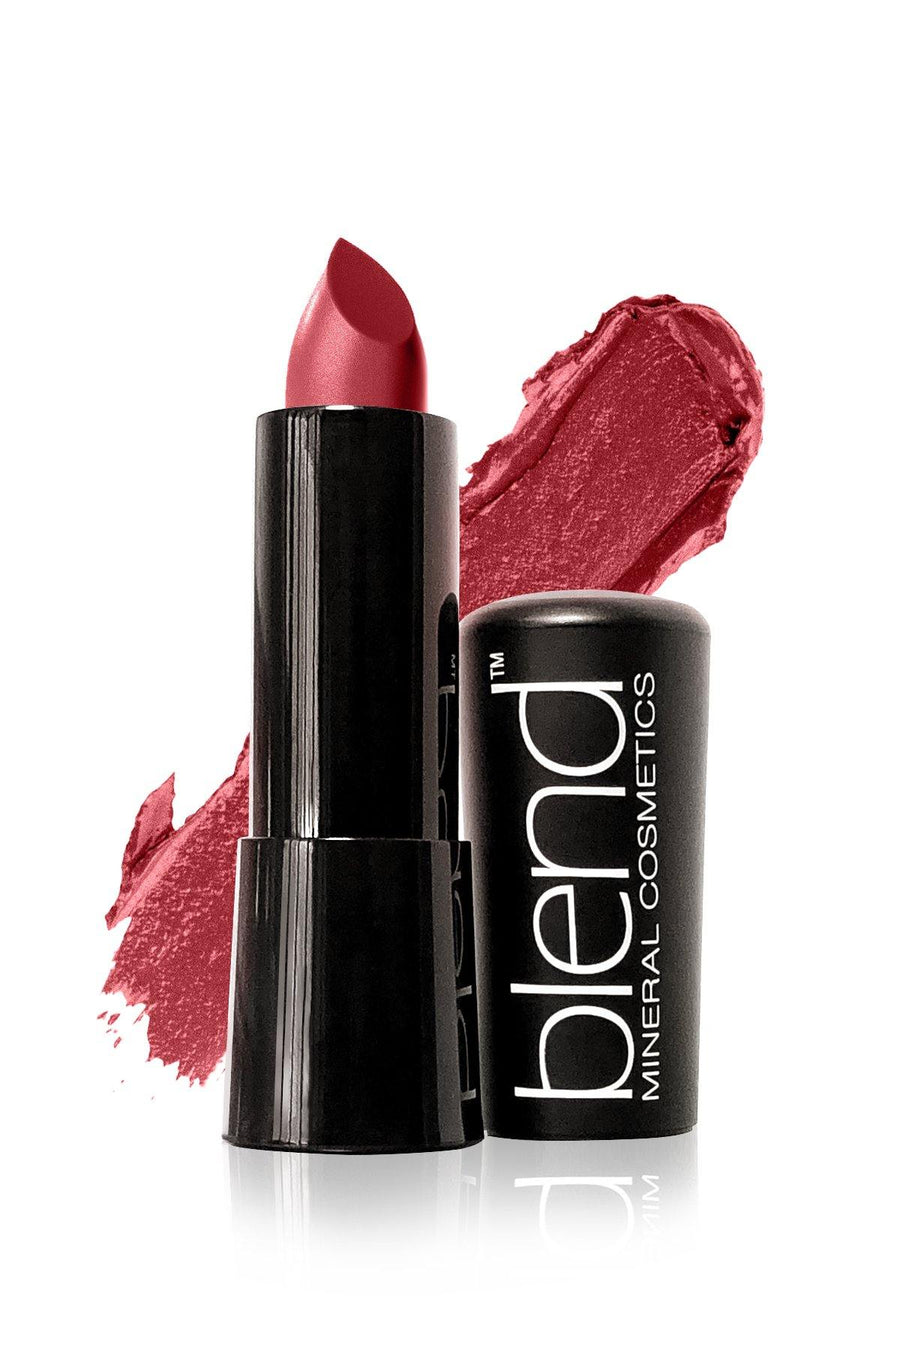 Lipstick #15 - Brown Red - Blend Mineral Cosmetics